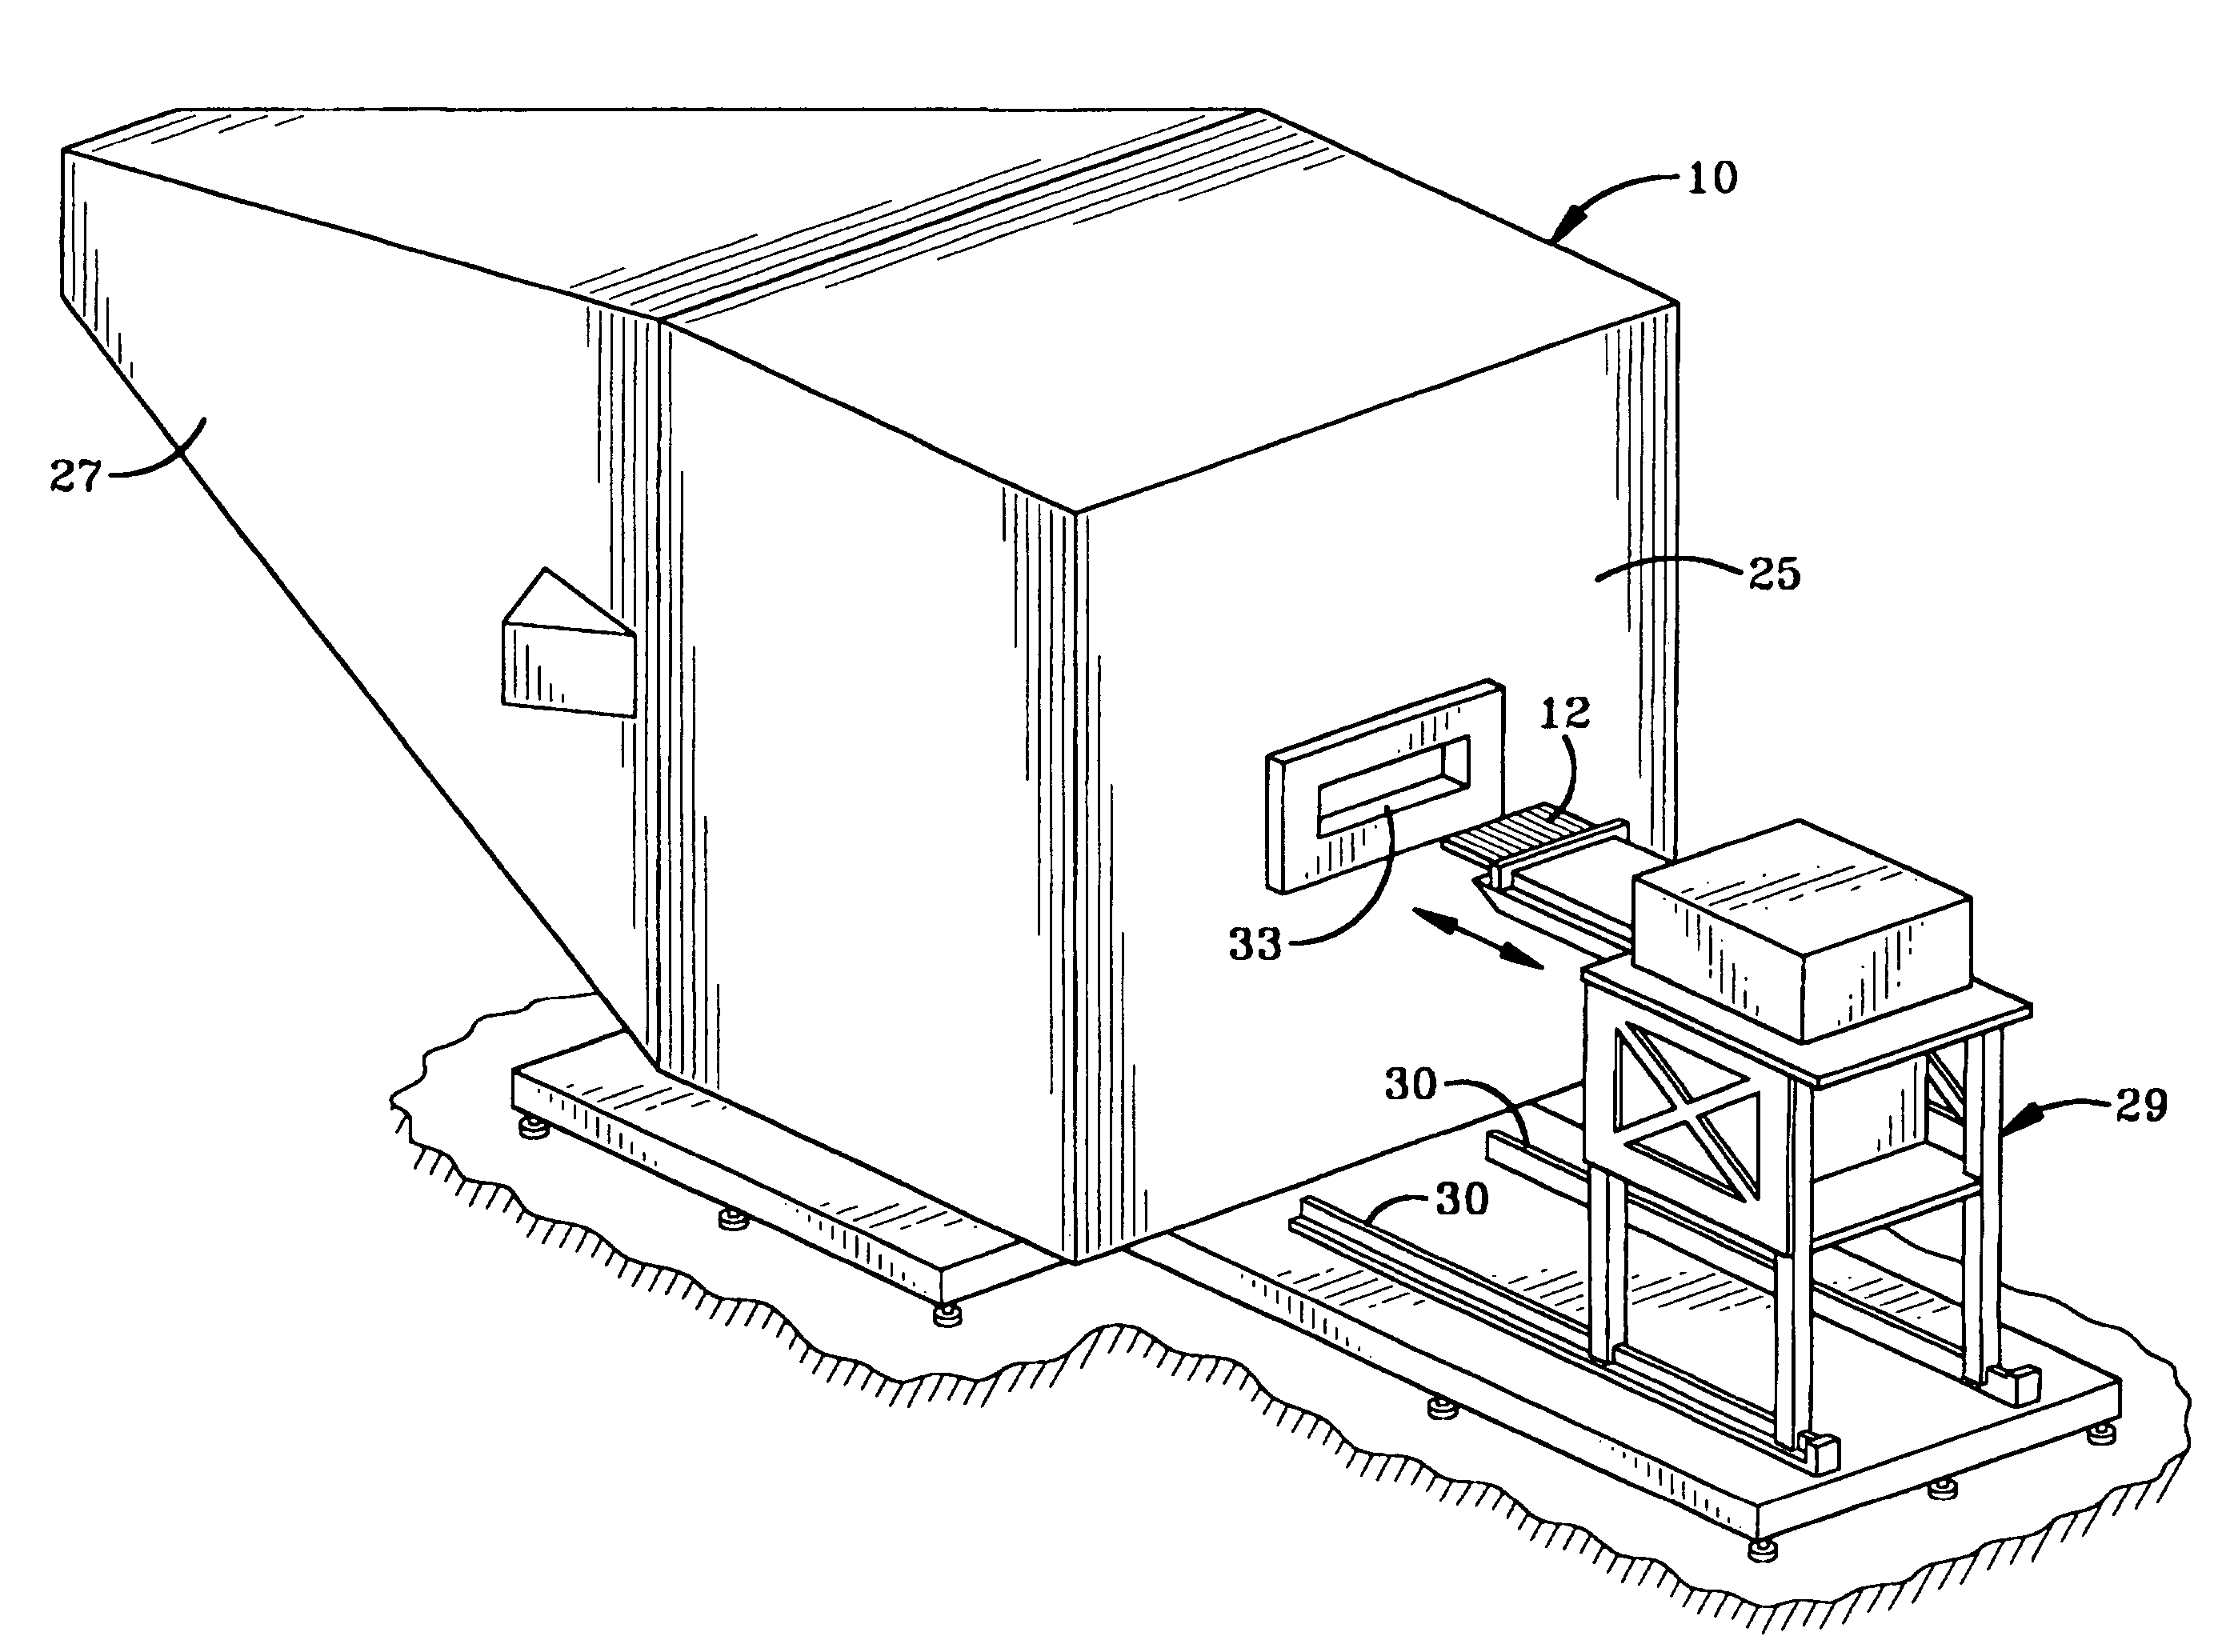 Method and system for determining antenna characterization